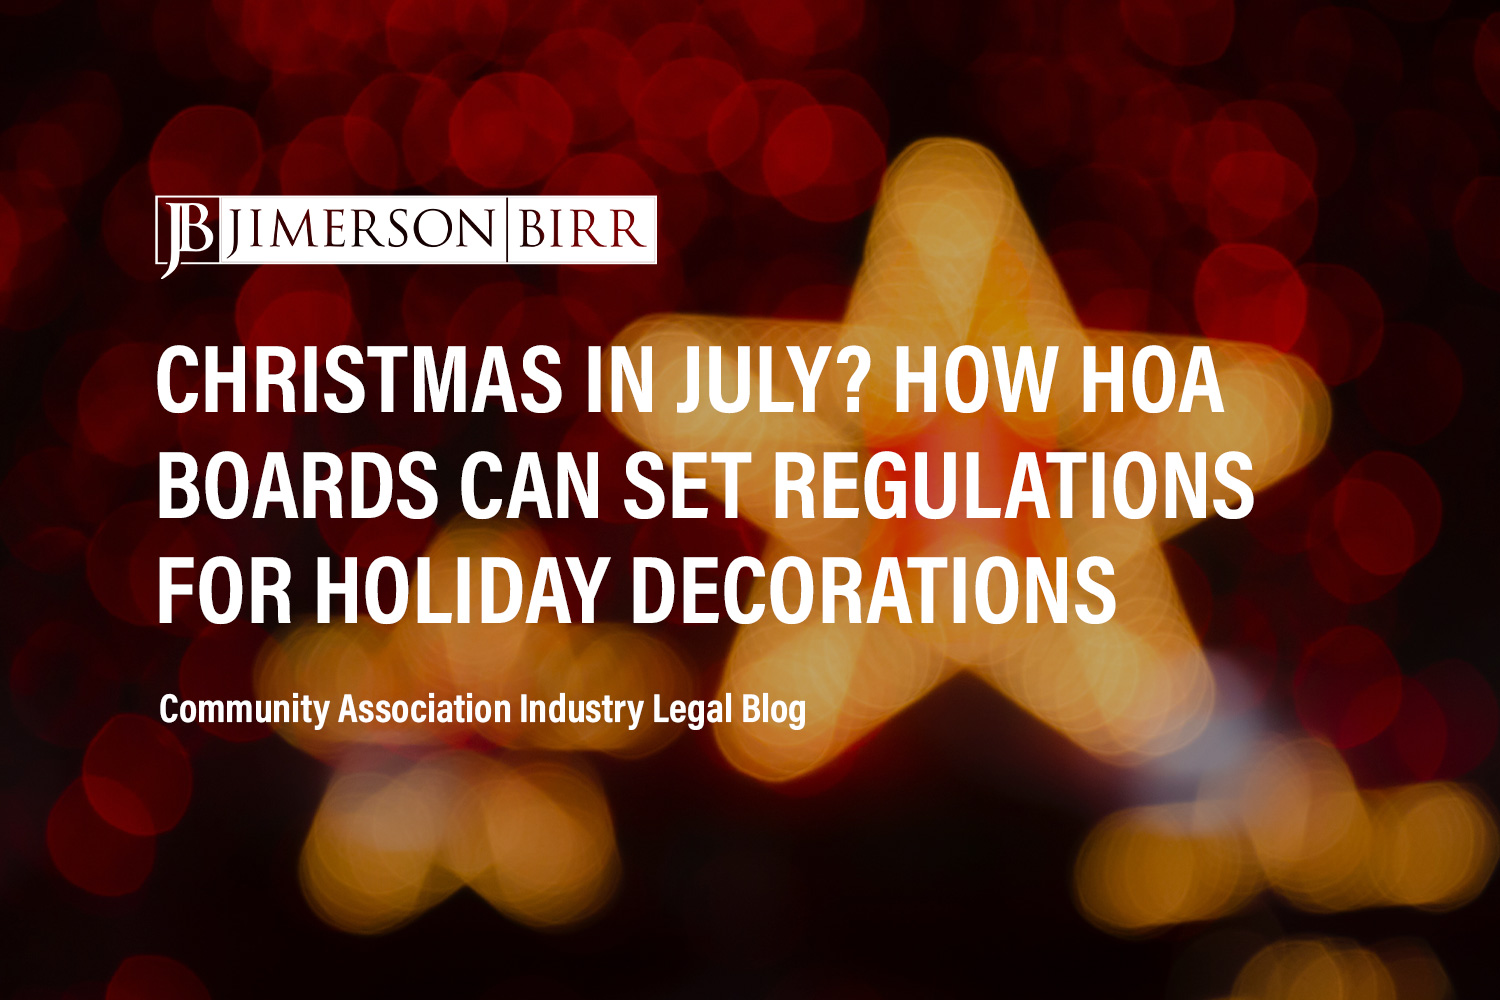 What Can a Homeowners’ Association Do to Keep Holiday Decorations from Staying Up All Year?